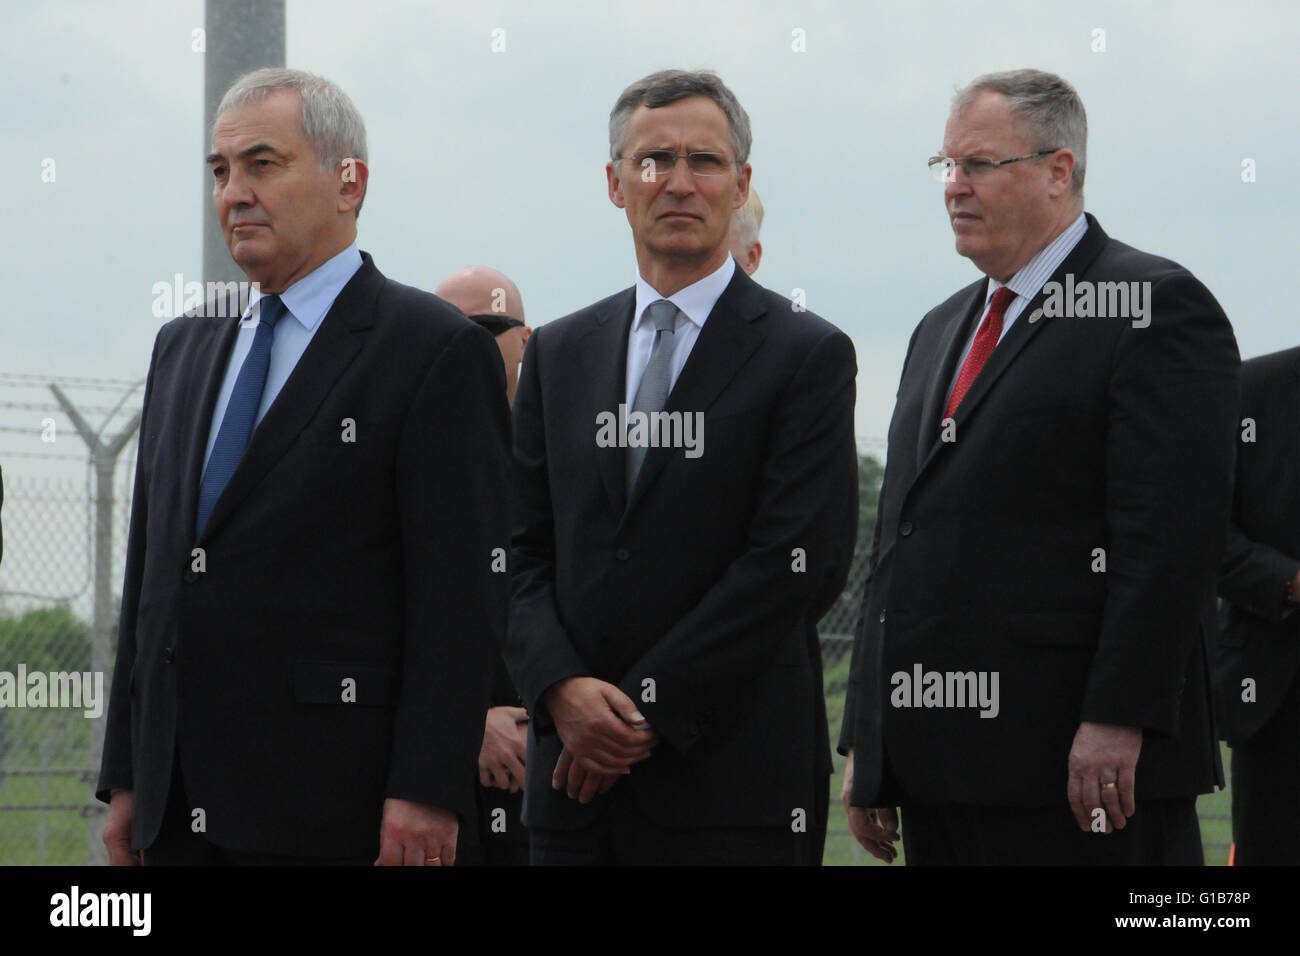 Deveselu, Bucharest. 12th May, 2016. NATO Secretary General Jens Stoltenberg(C), U.S. Deputy Secretary of Defense Robert Work(R) and Romanian Foreign Minister Lazar Comanescu attend the ceremony at Deveselu military base, southwest of Bucharest, Romania on May 12, 2016. The U.S. AEGIS Ashore missile defense system in Romania is certified for operations, NATO Secretary General Jens Stoltenberg announced Thursday. Credit:  Lin Huifen/Xinhua/Alamy Live News Stock Photo